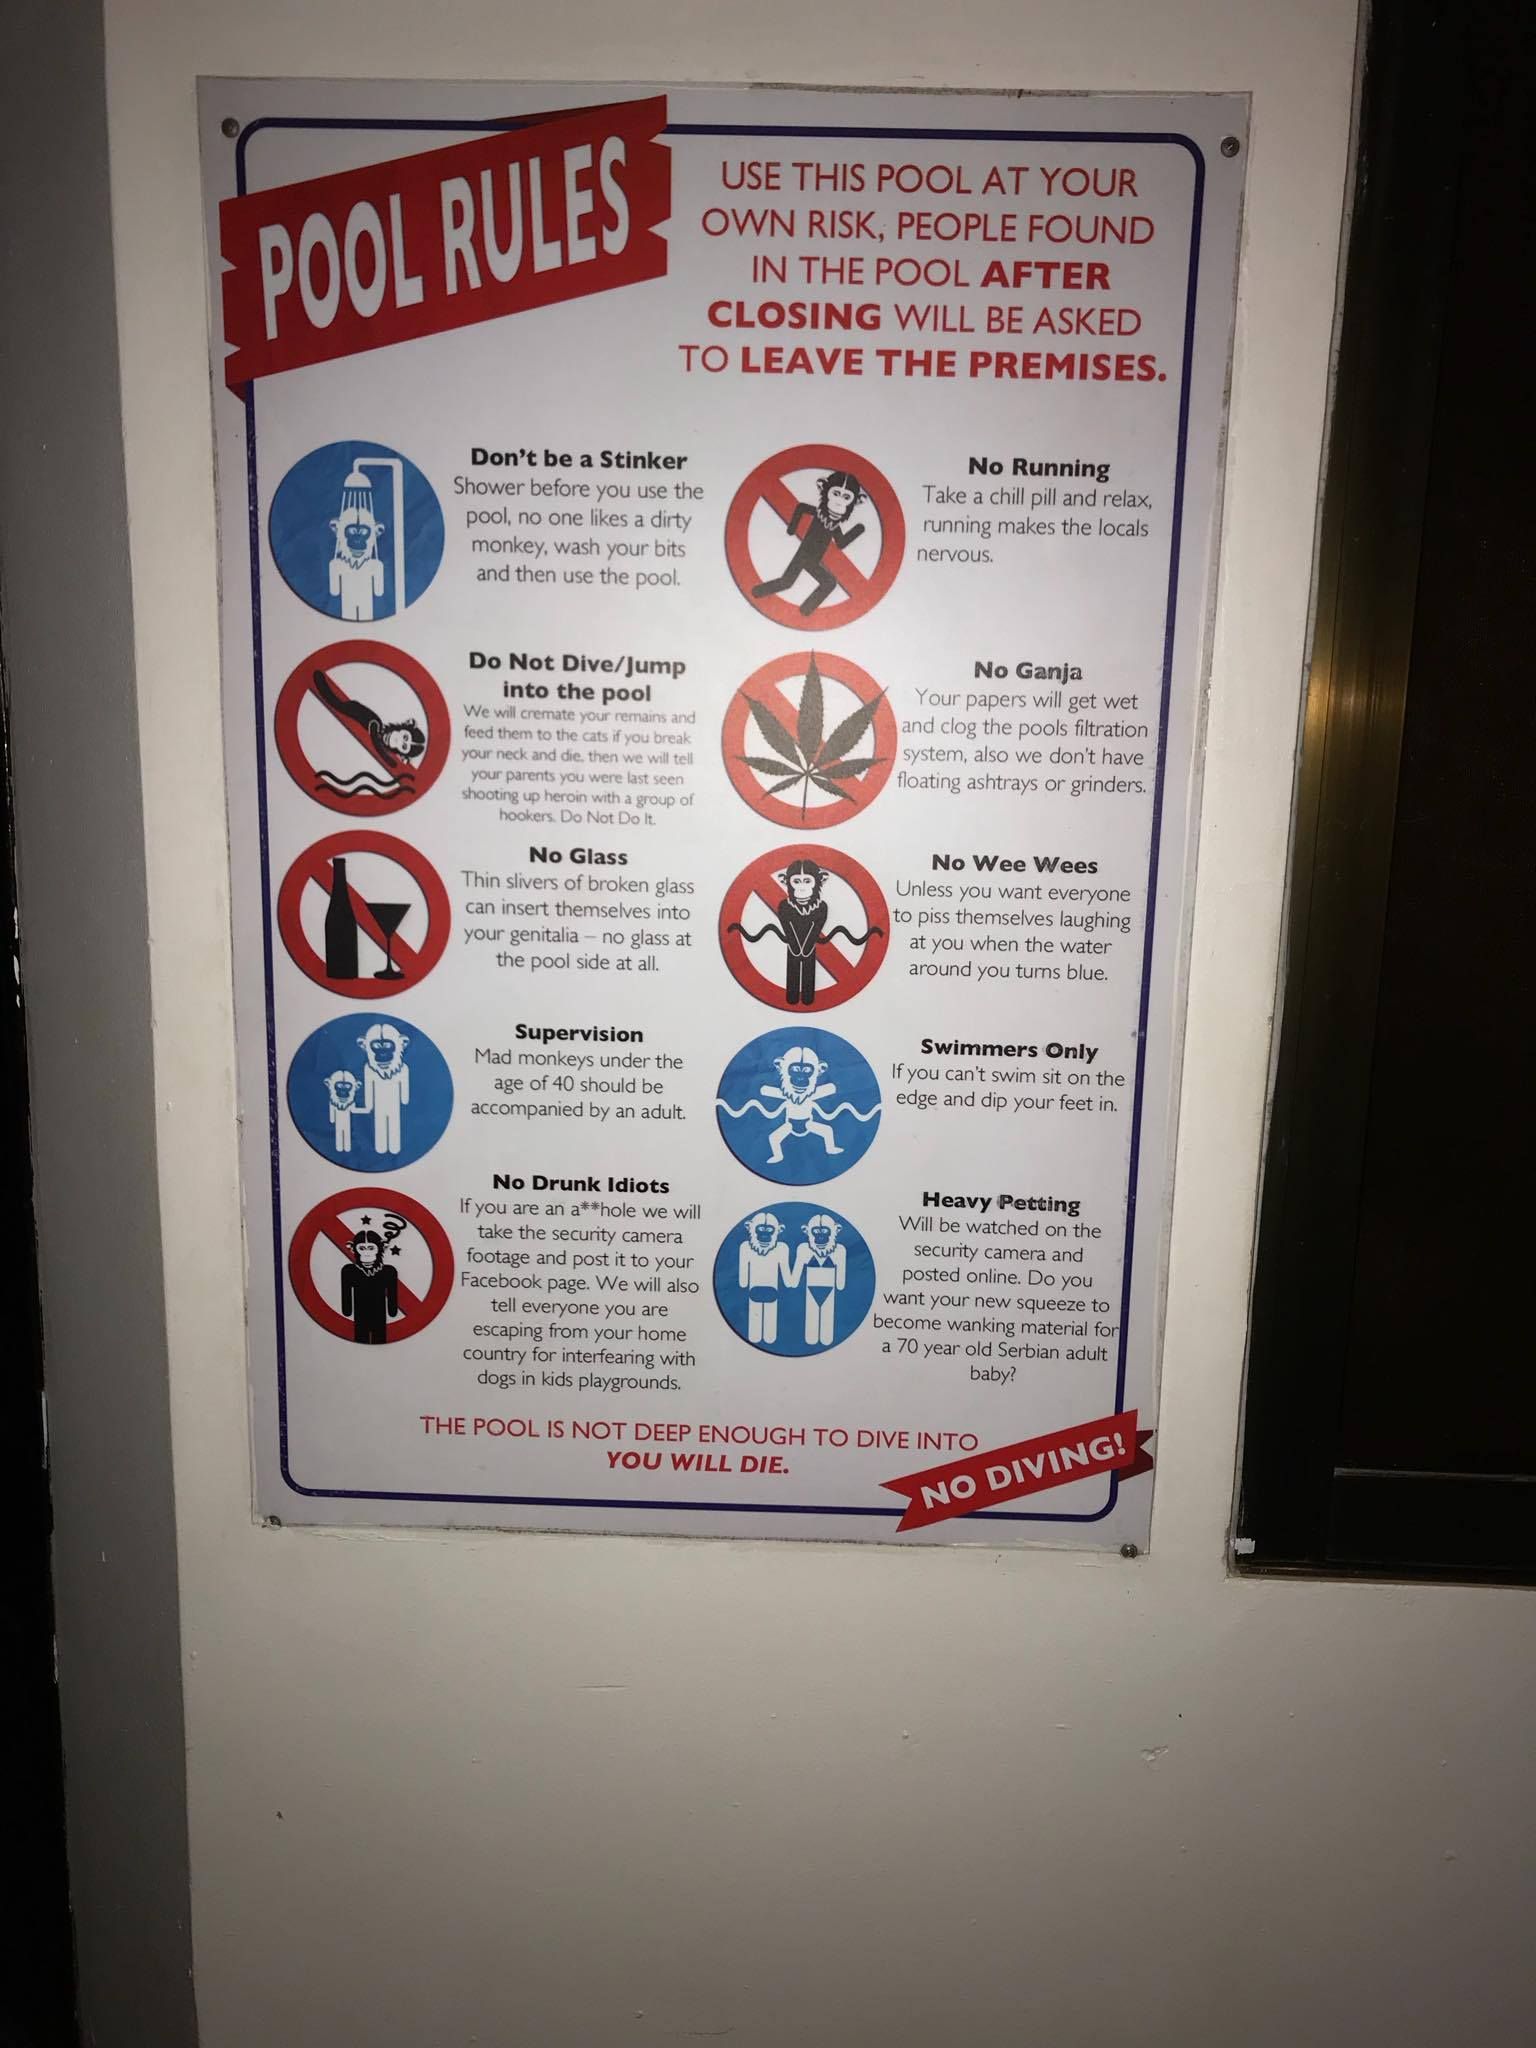 Girlfriend sent me this picture of her pool rules in Cambodia